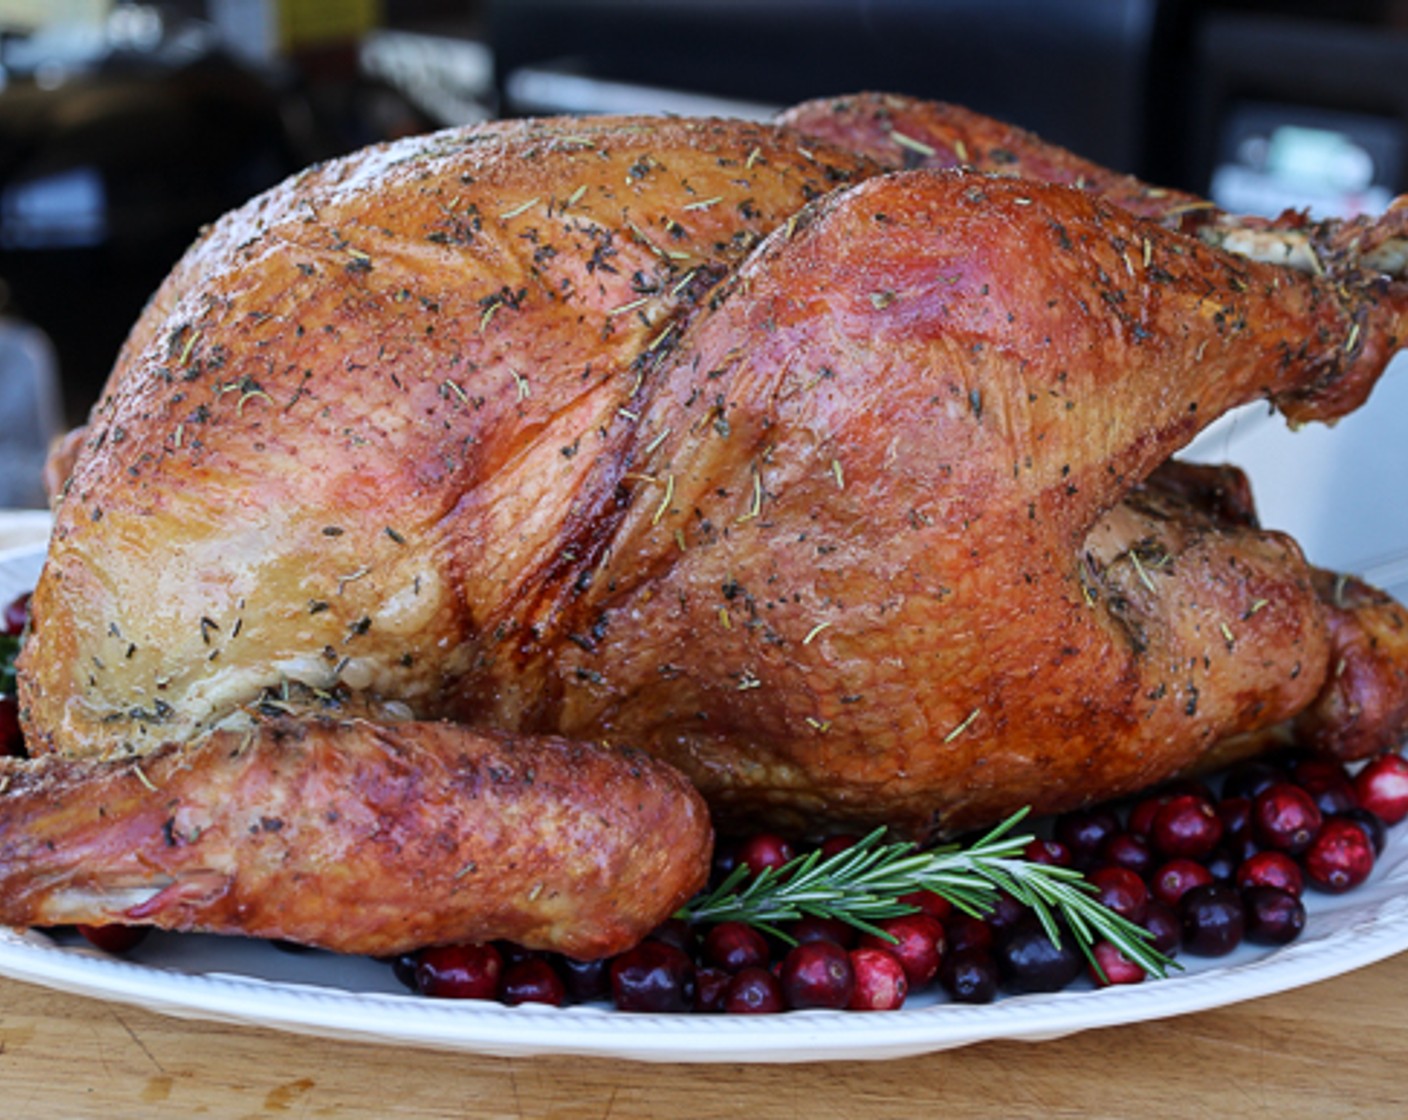 Butter and Herb Smoked Turkey